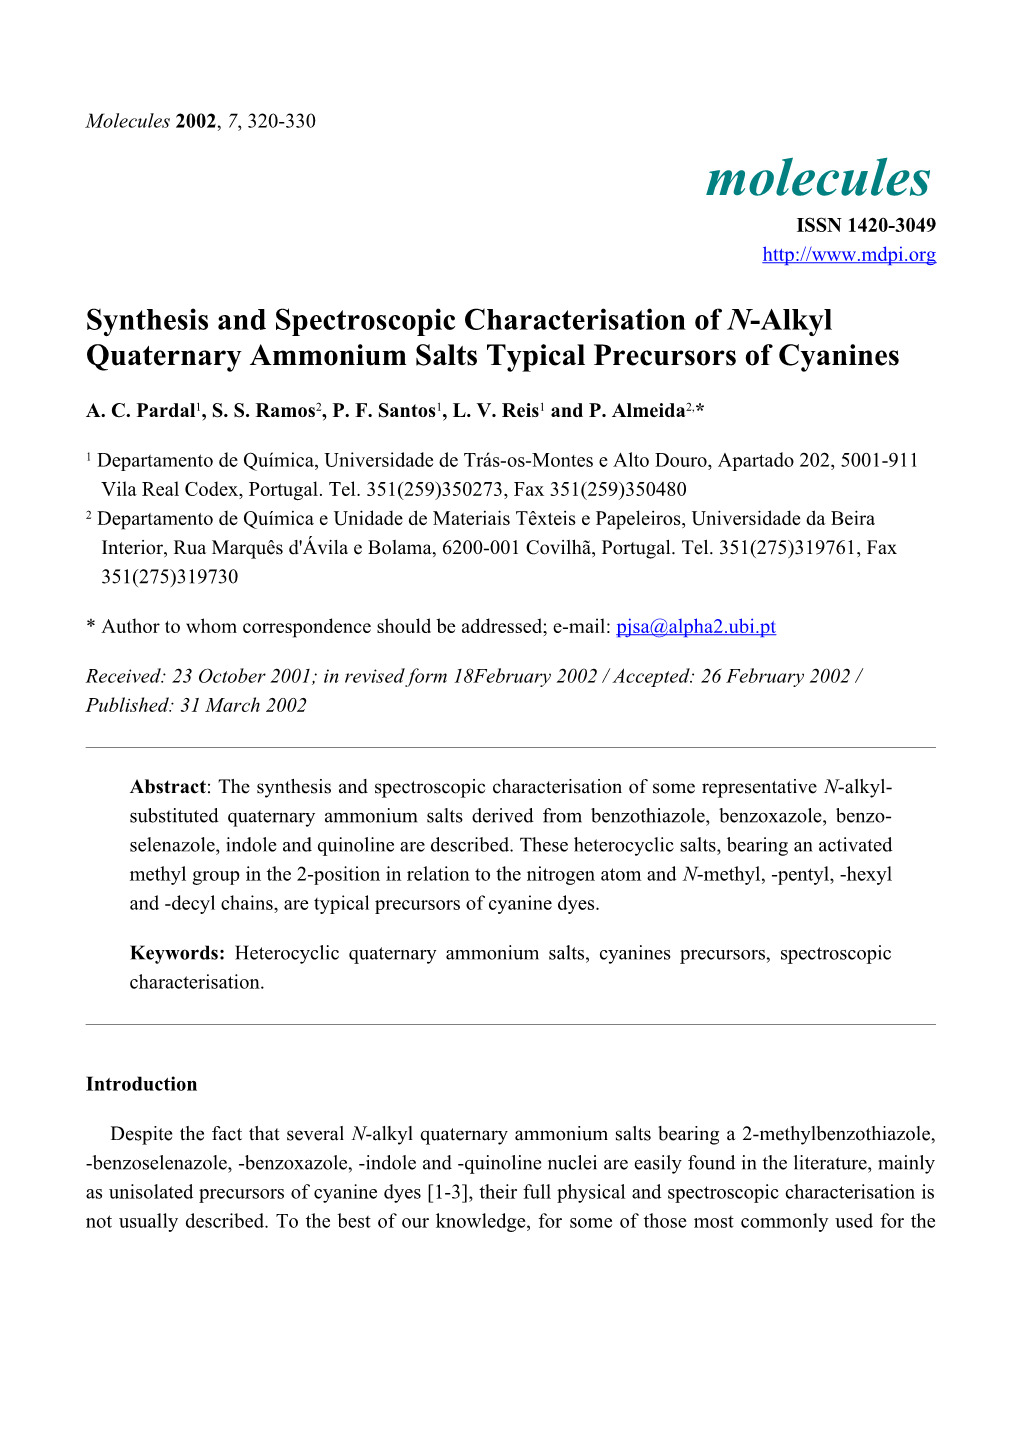 Synthesis, Isolation and Spectroscopic Characterization of N-Alkyl Quaternary Ammonium